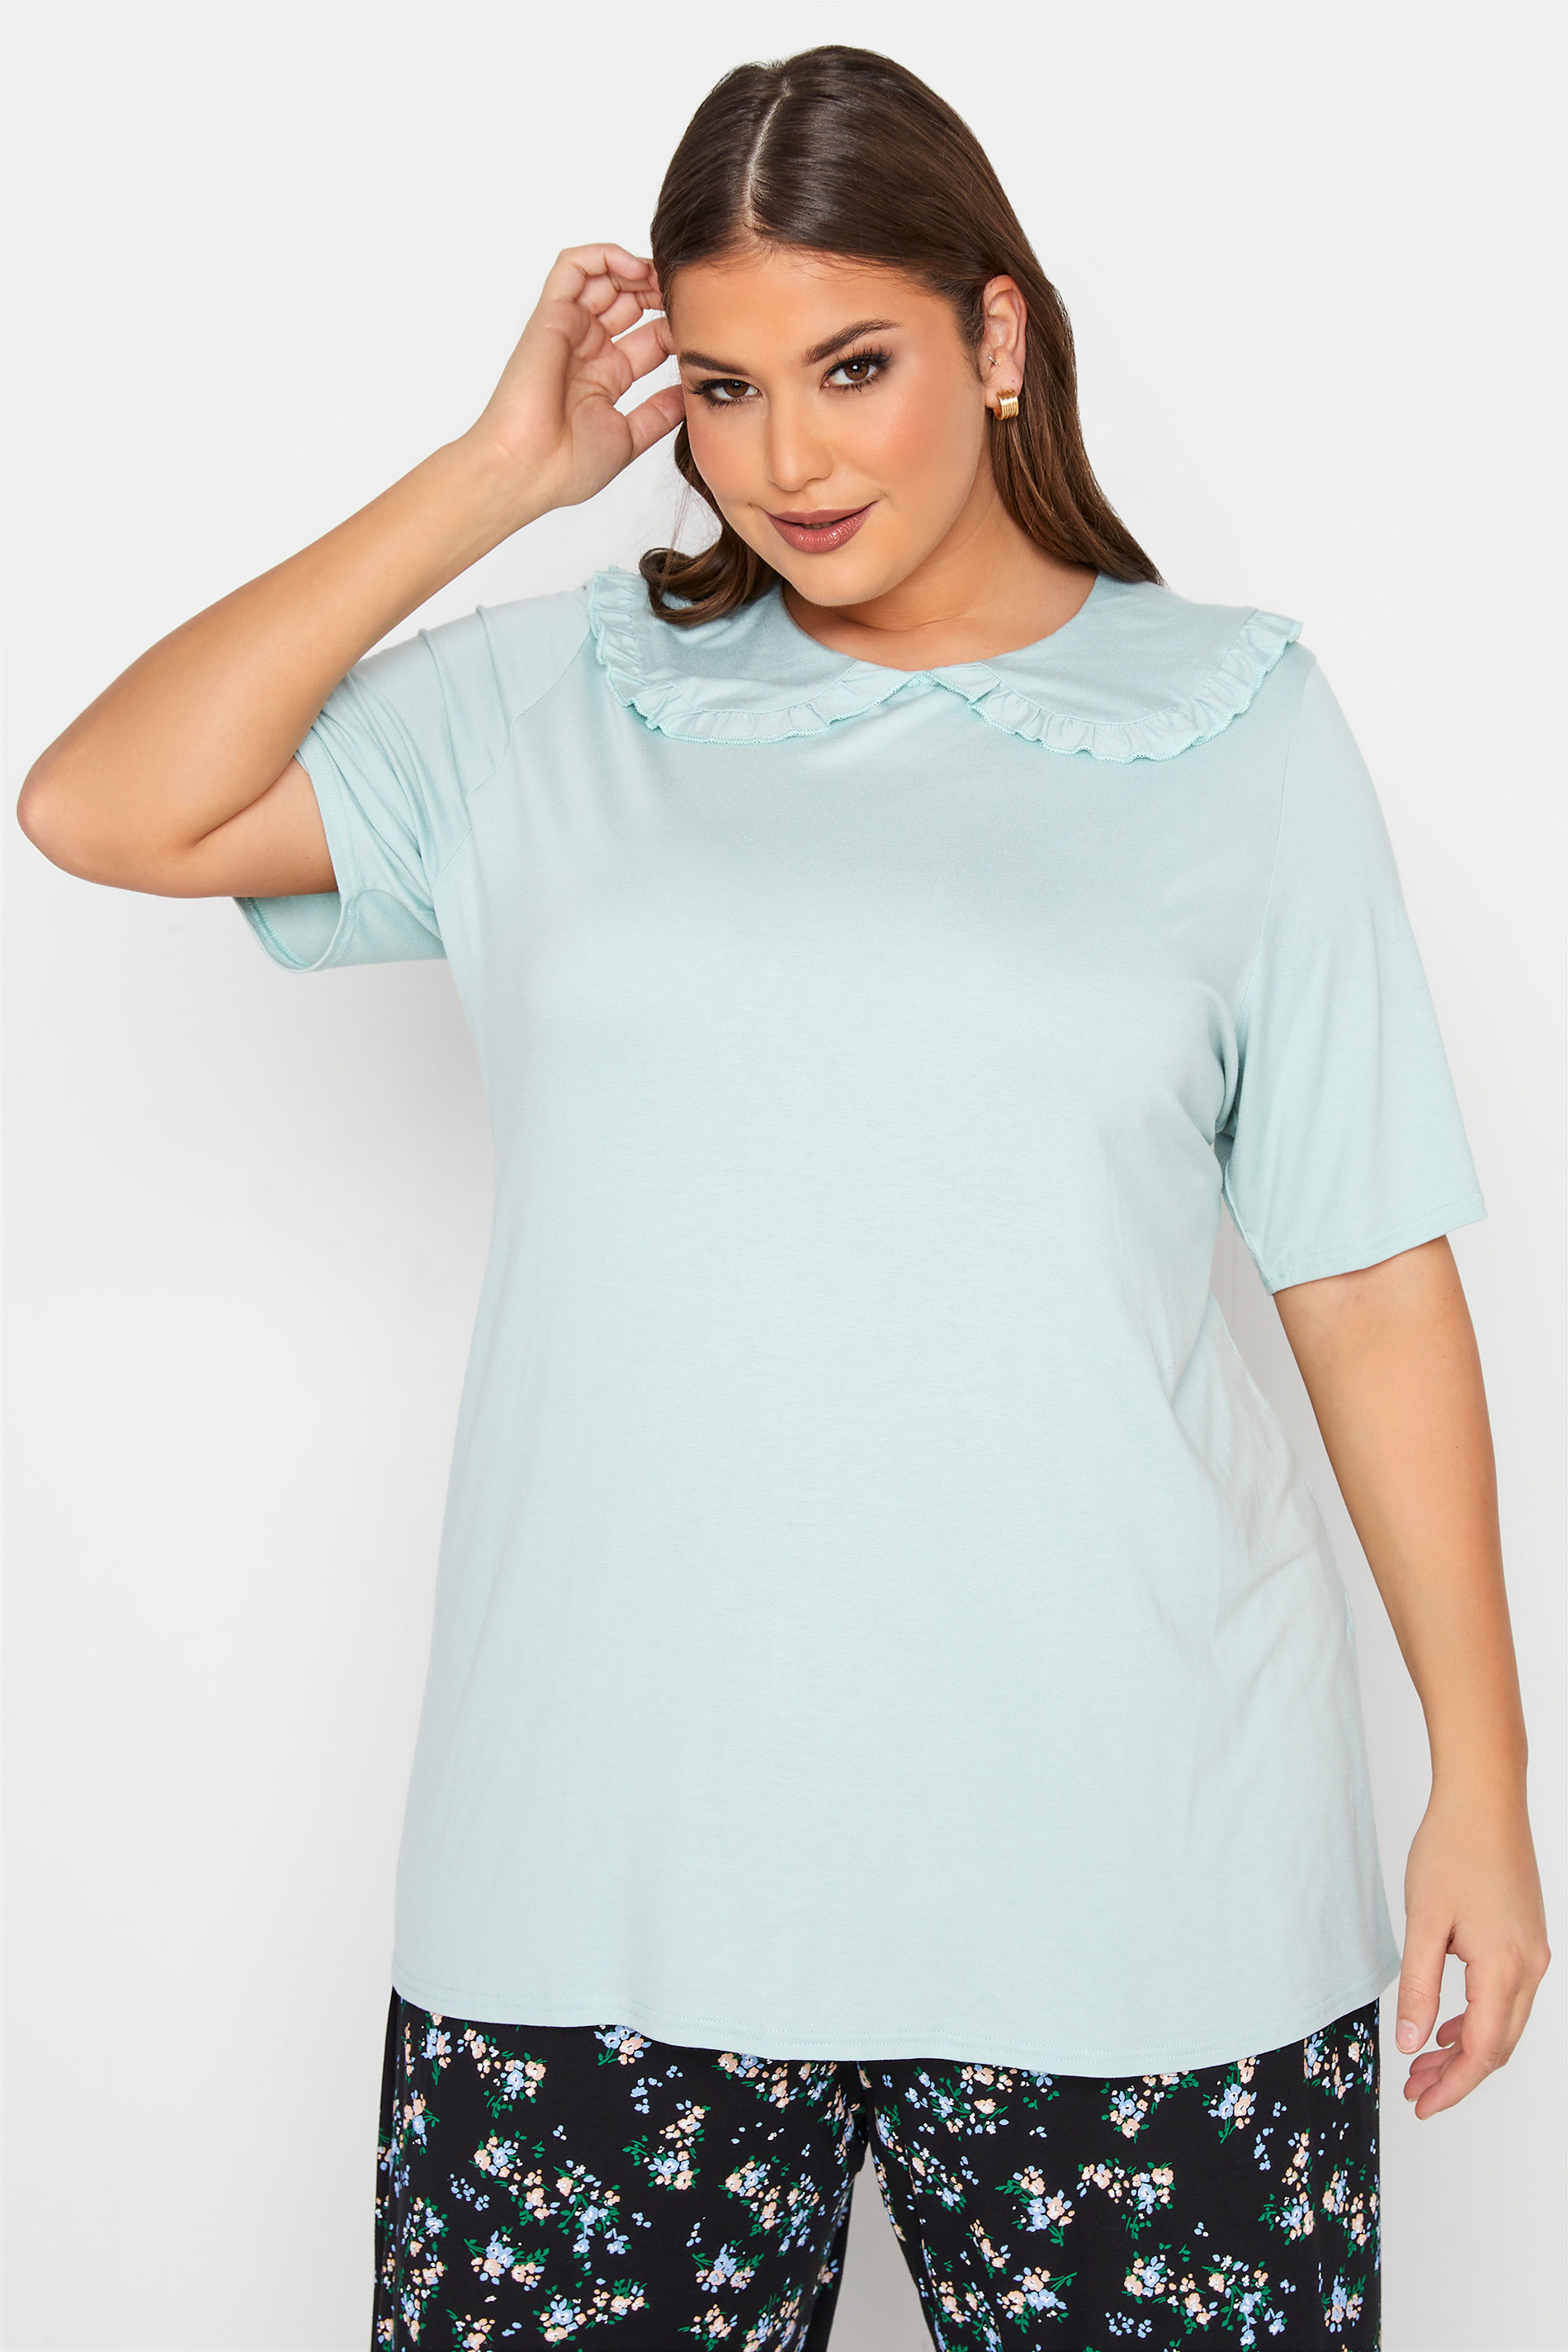 LIMITED COLLECTION Curve Mint Green Frill Collar T-Shirt_A.jpg